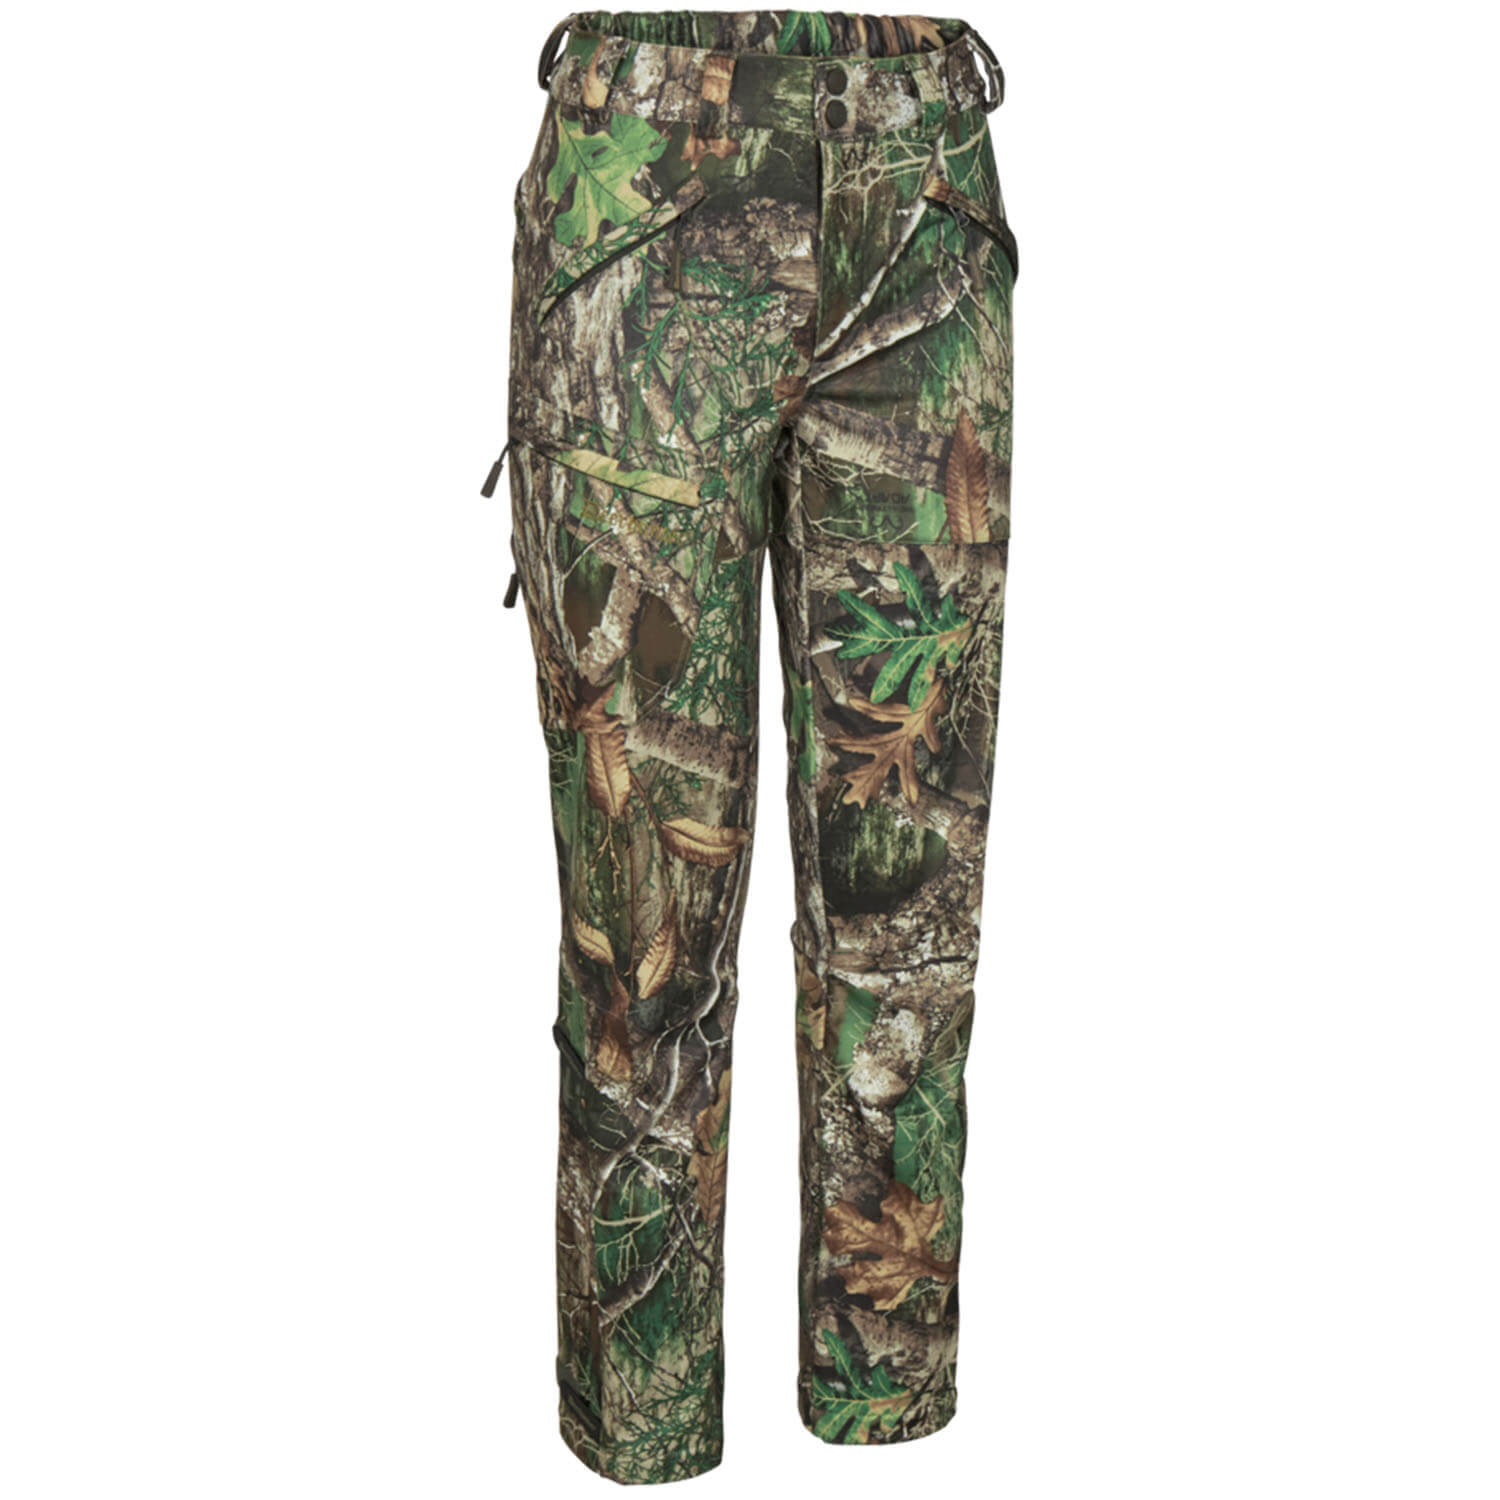 Deerhunter Trousers Lady April - Hunting Trousers